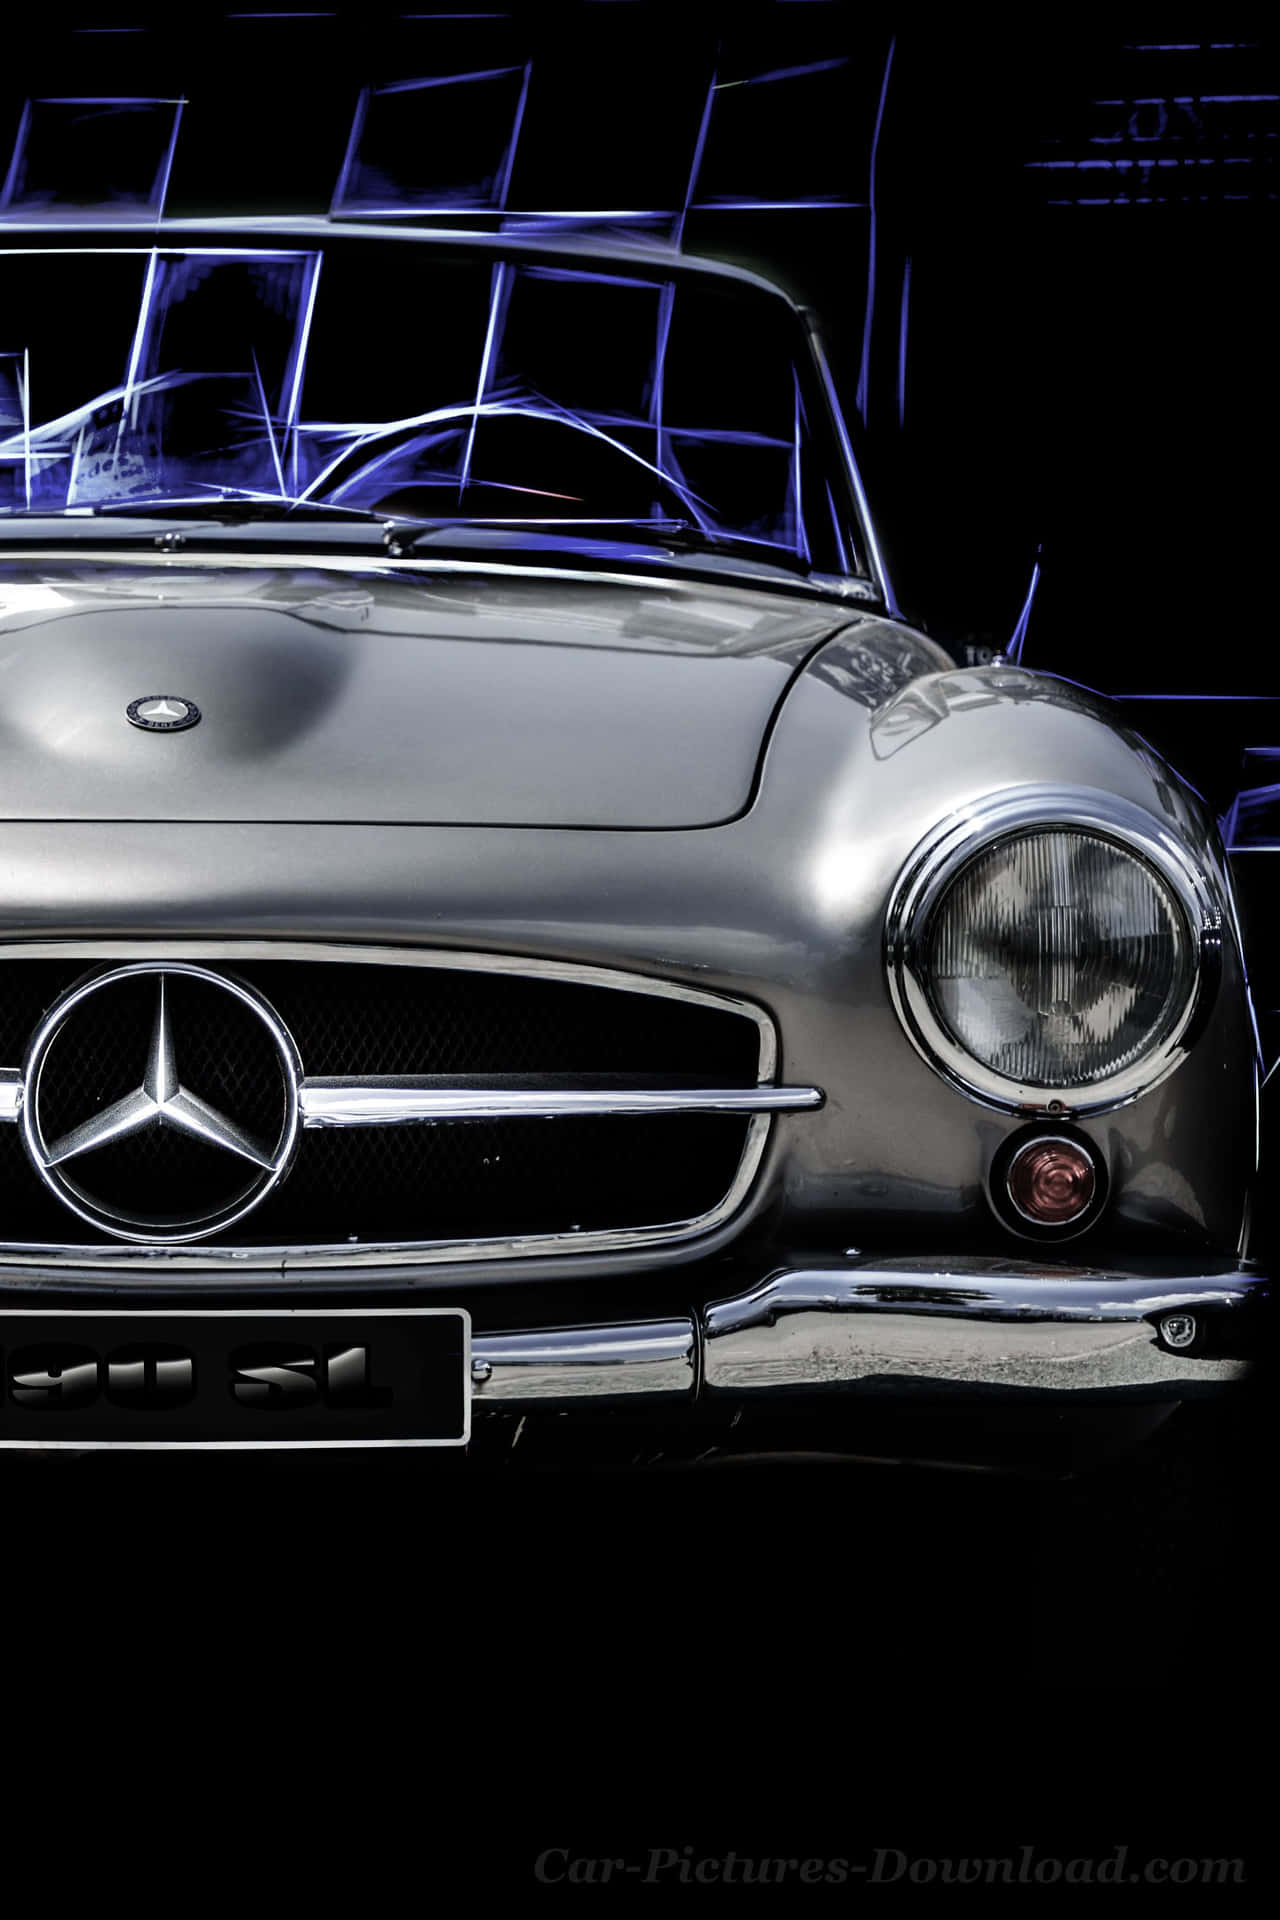 Free Mercedes Wallpaper Downloads, [300+] Mercedes Wallpapers for FREE |  